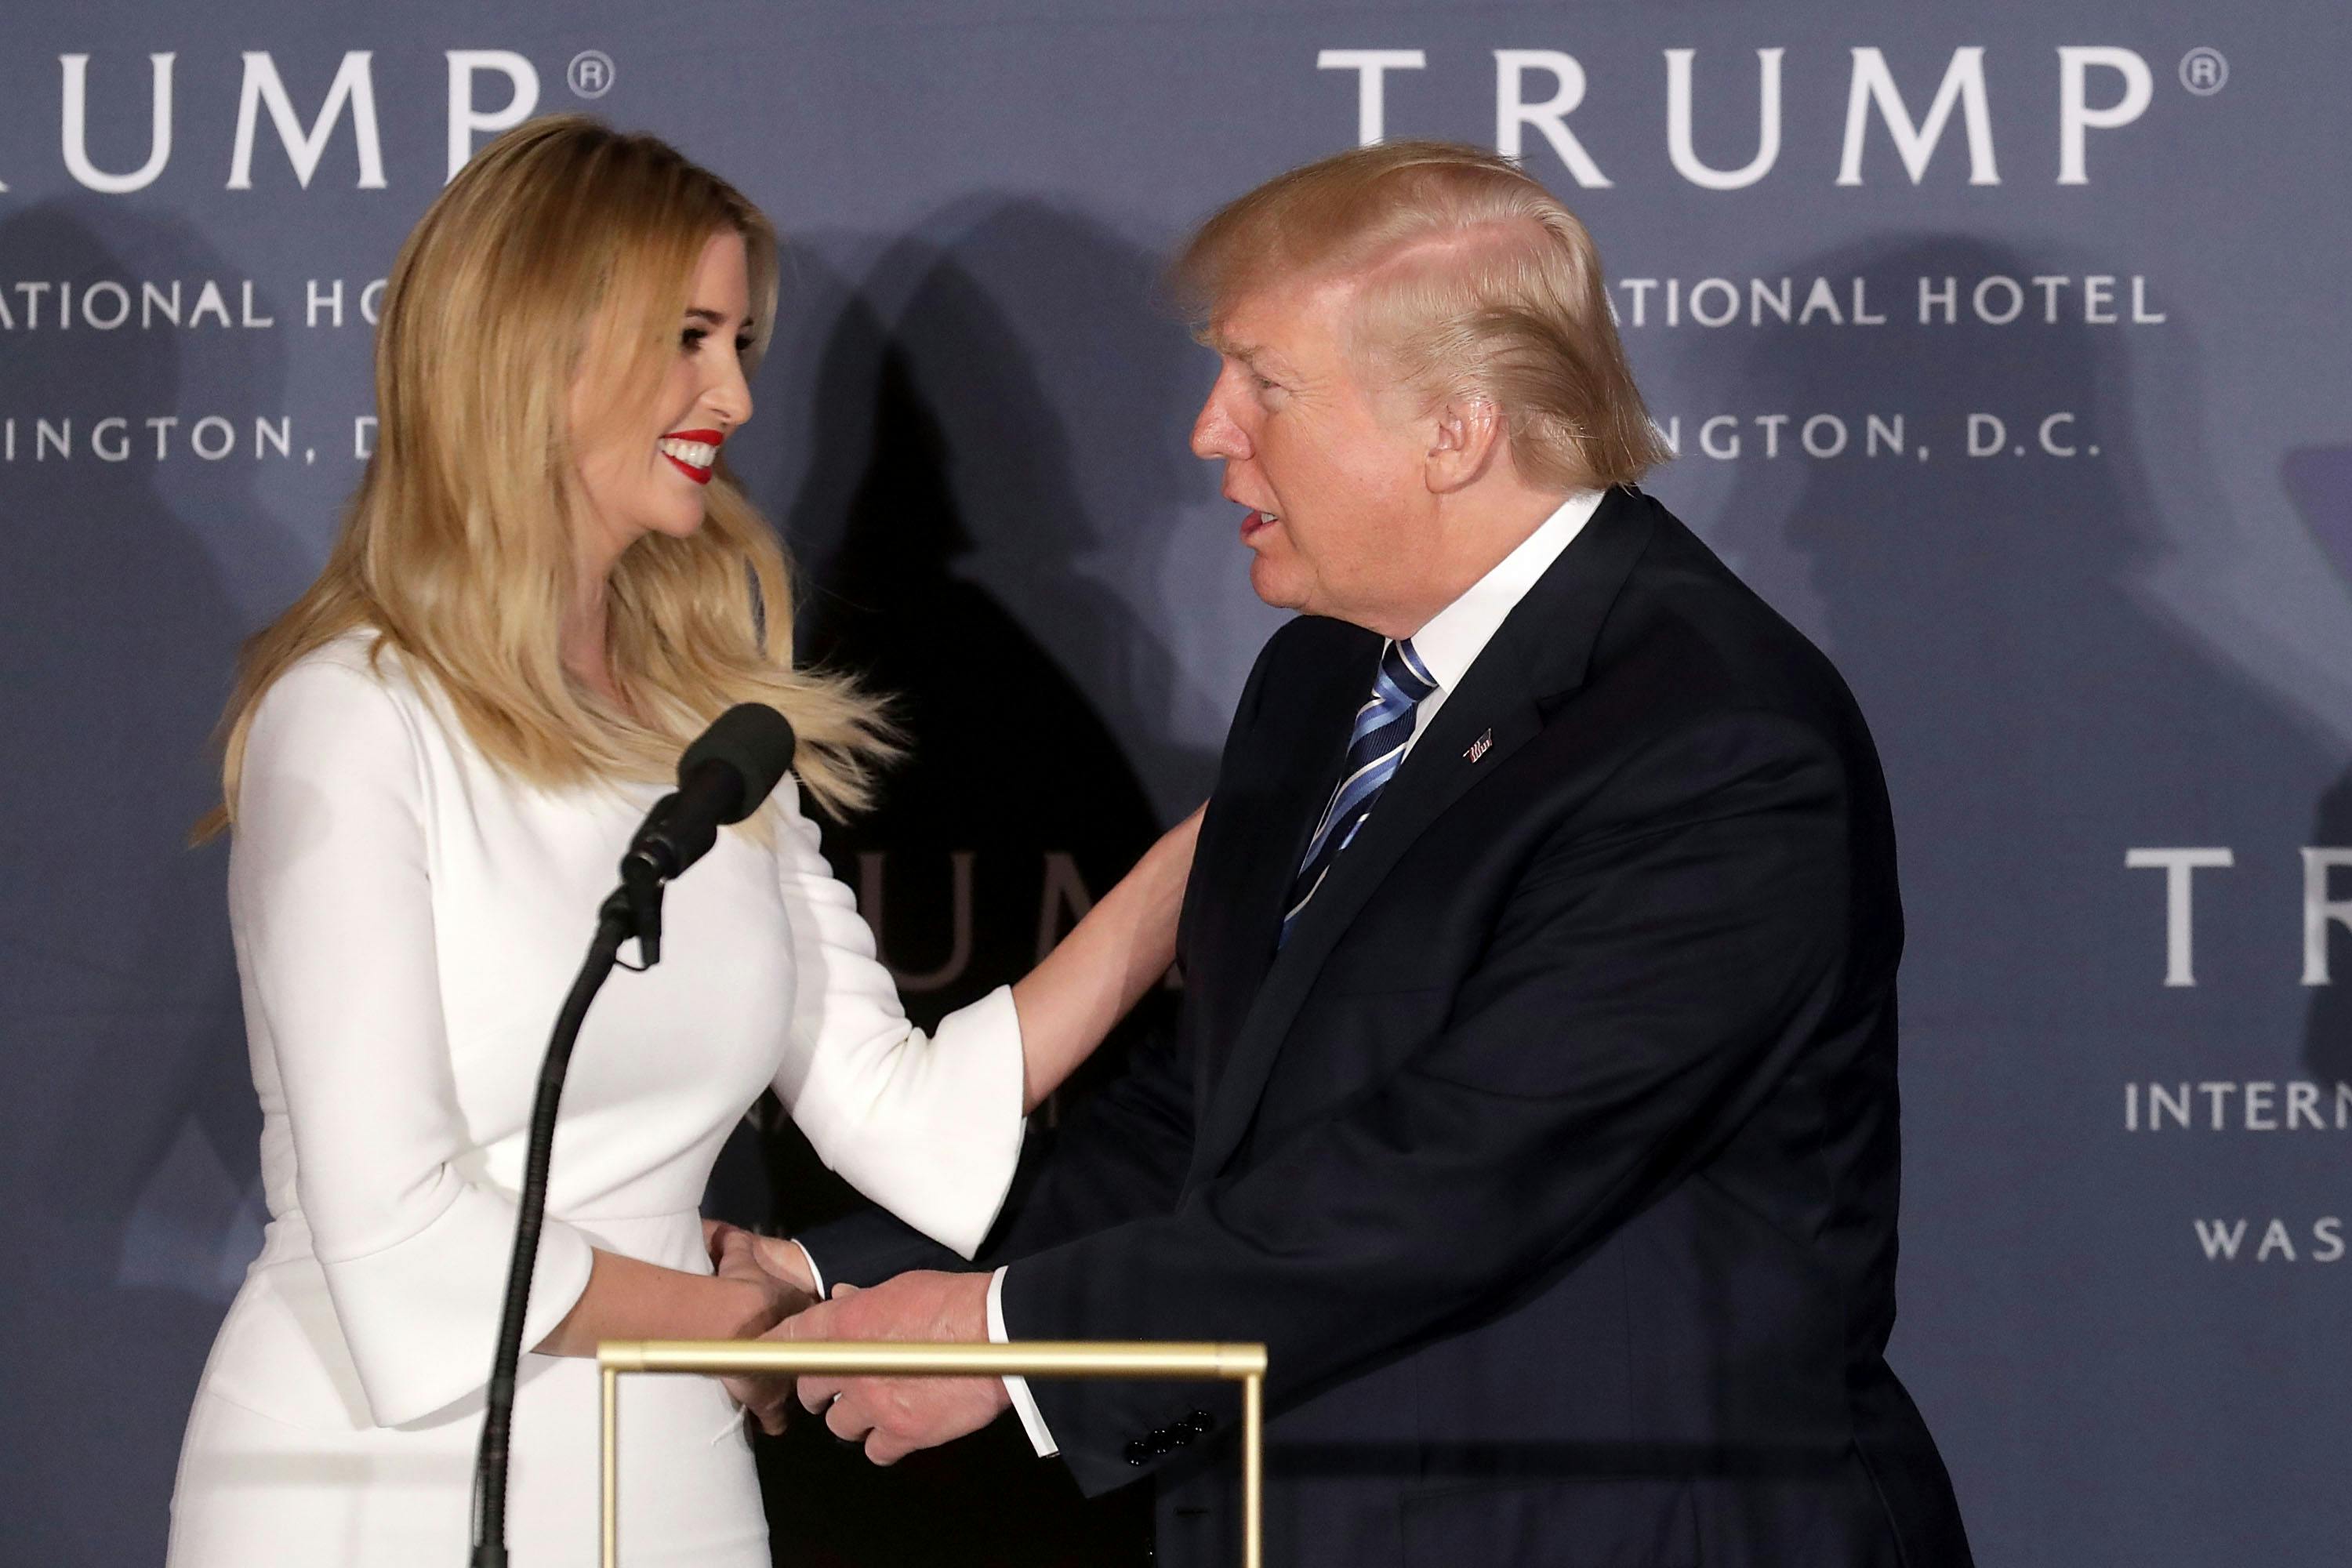 Donald Trump Fantasized About Having Sex With Ivanka, New Book Says The New Republic image pic